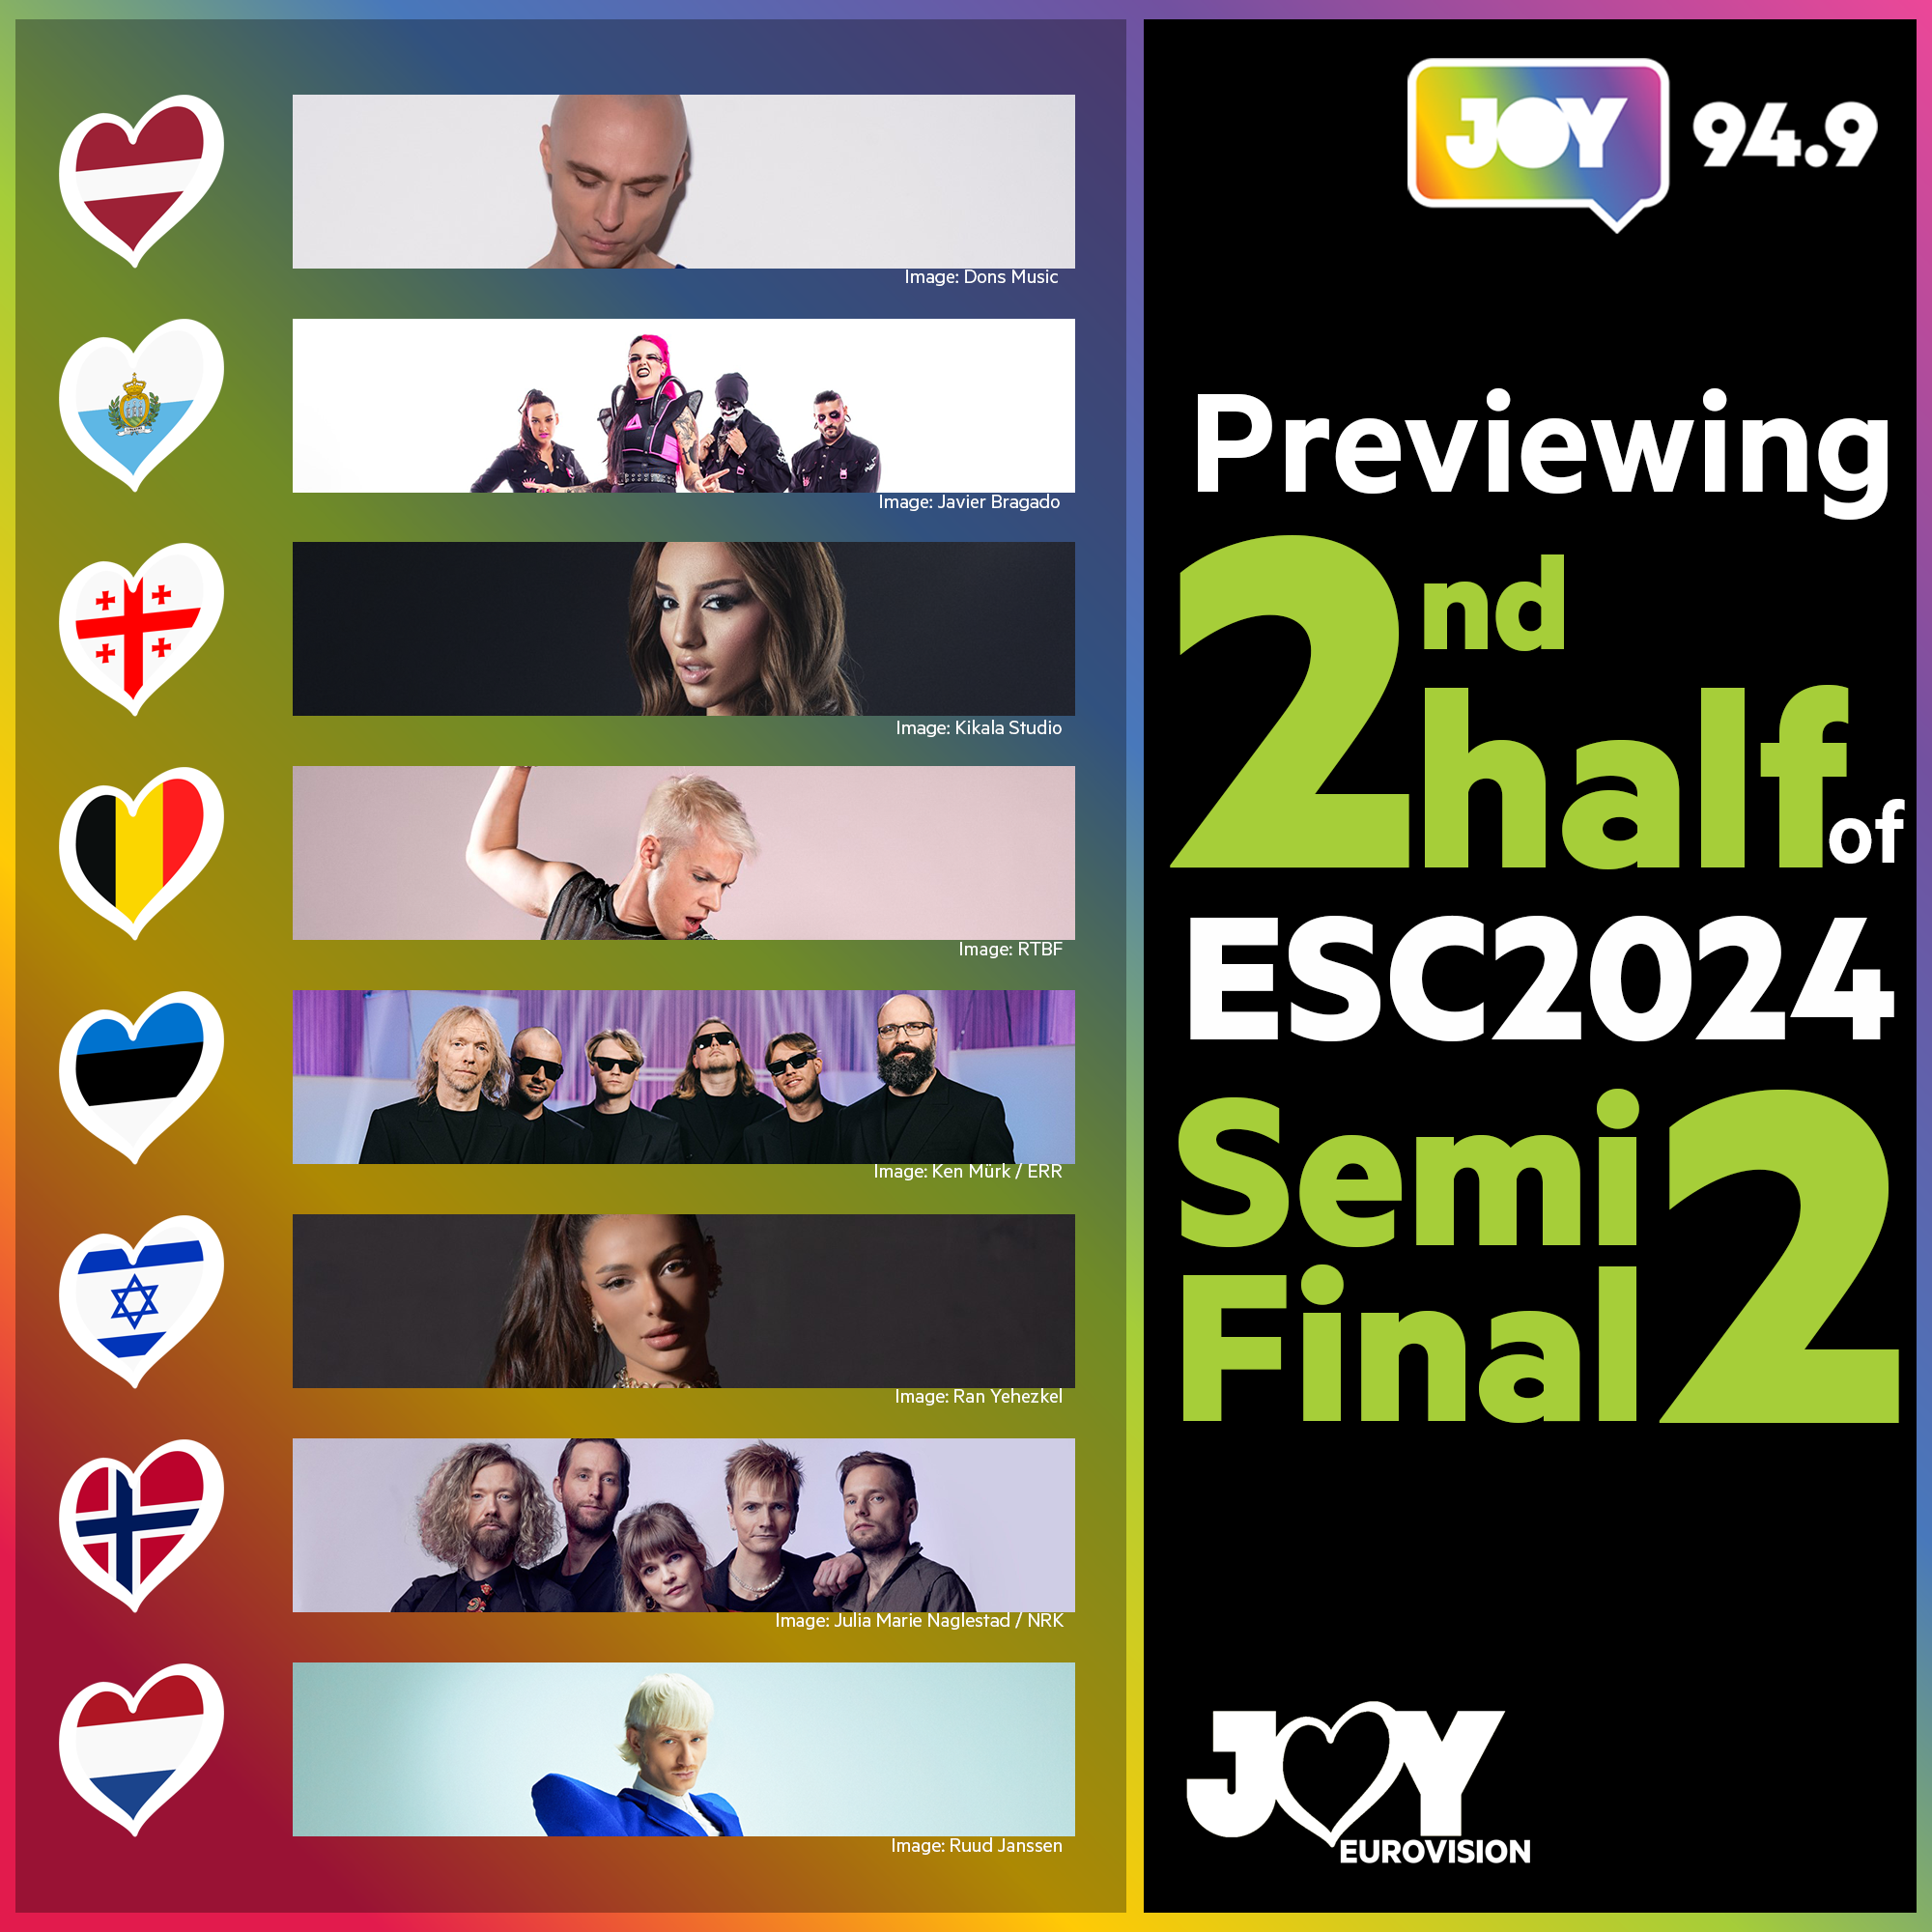 Previewing the second half of Eurovision 2024 Semi Final 2